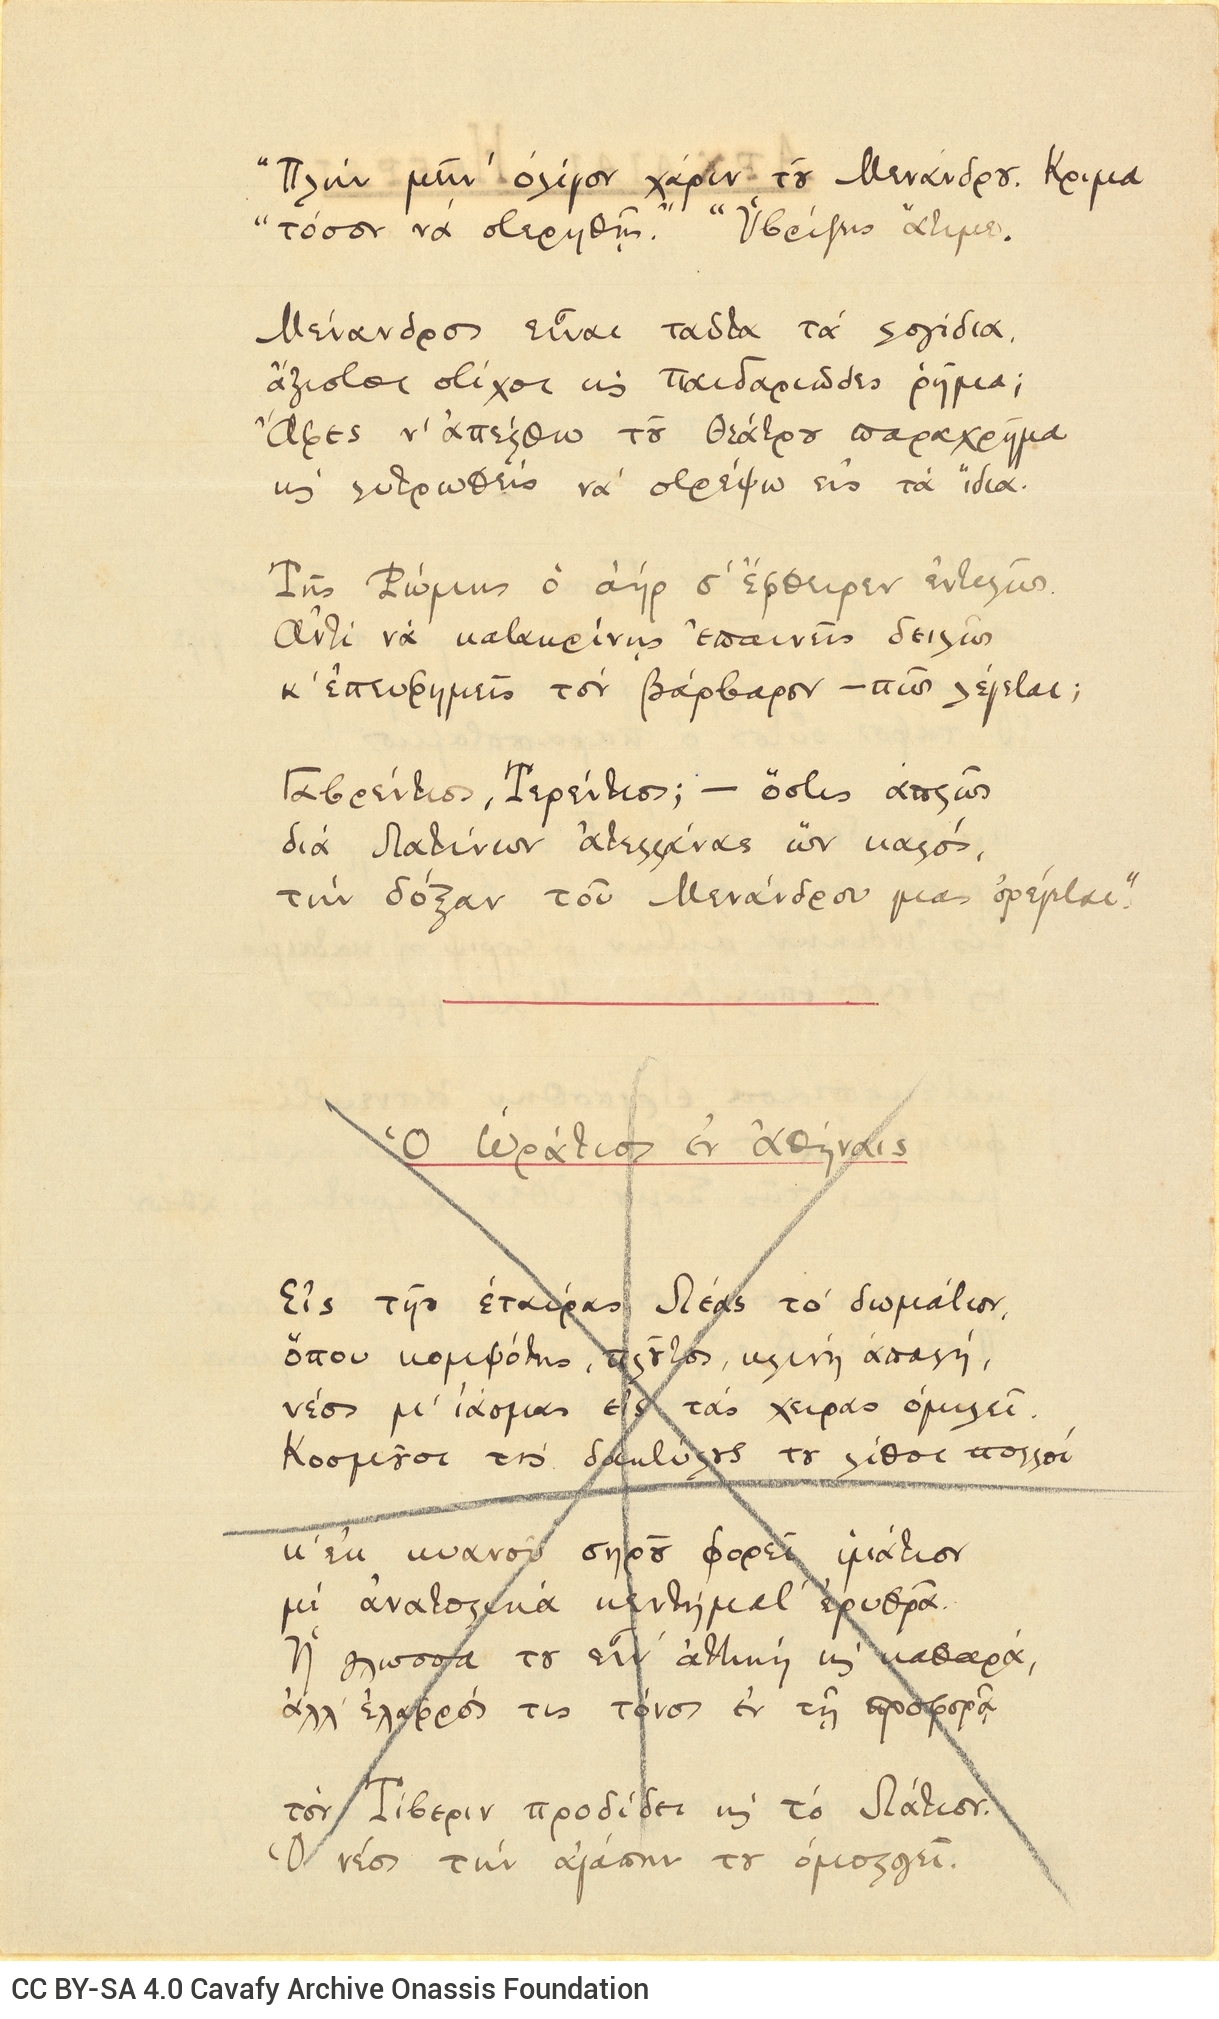 Manuscript of the poems "Epitaph", "Displeased Theatregoer" and of part of "Horace in Athens", under the general title "An